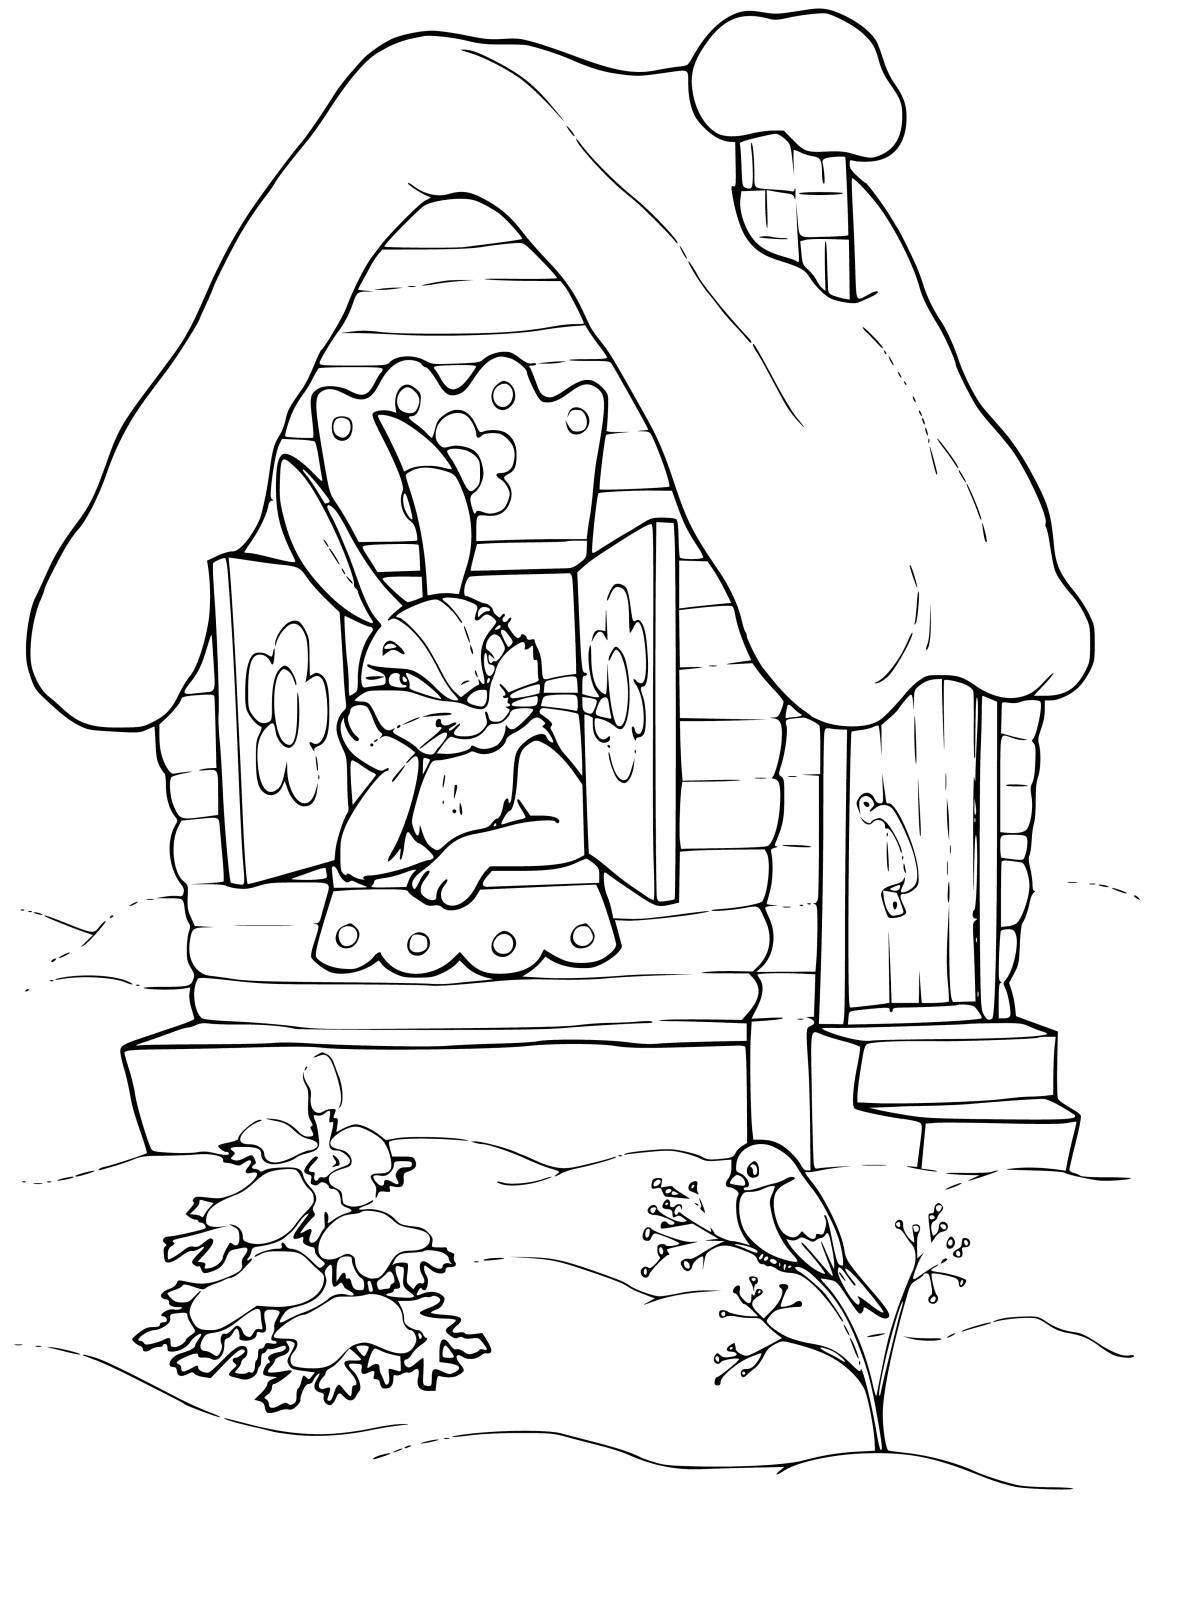 Coloring pages Russian folk tales